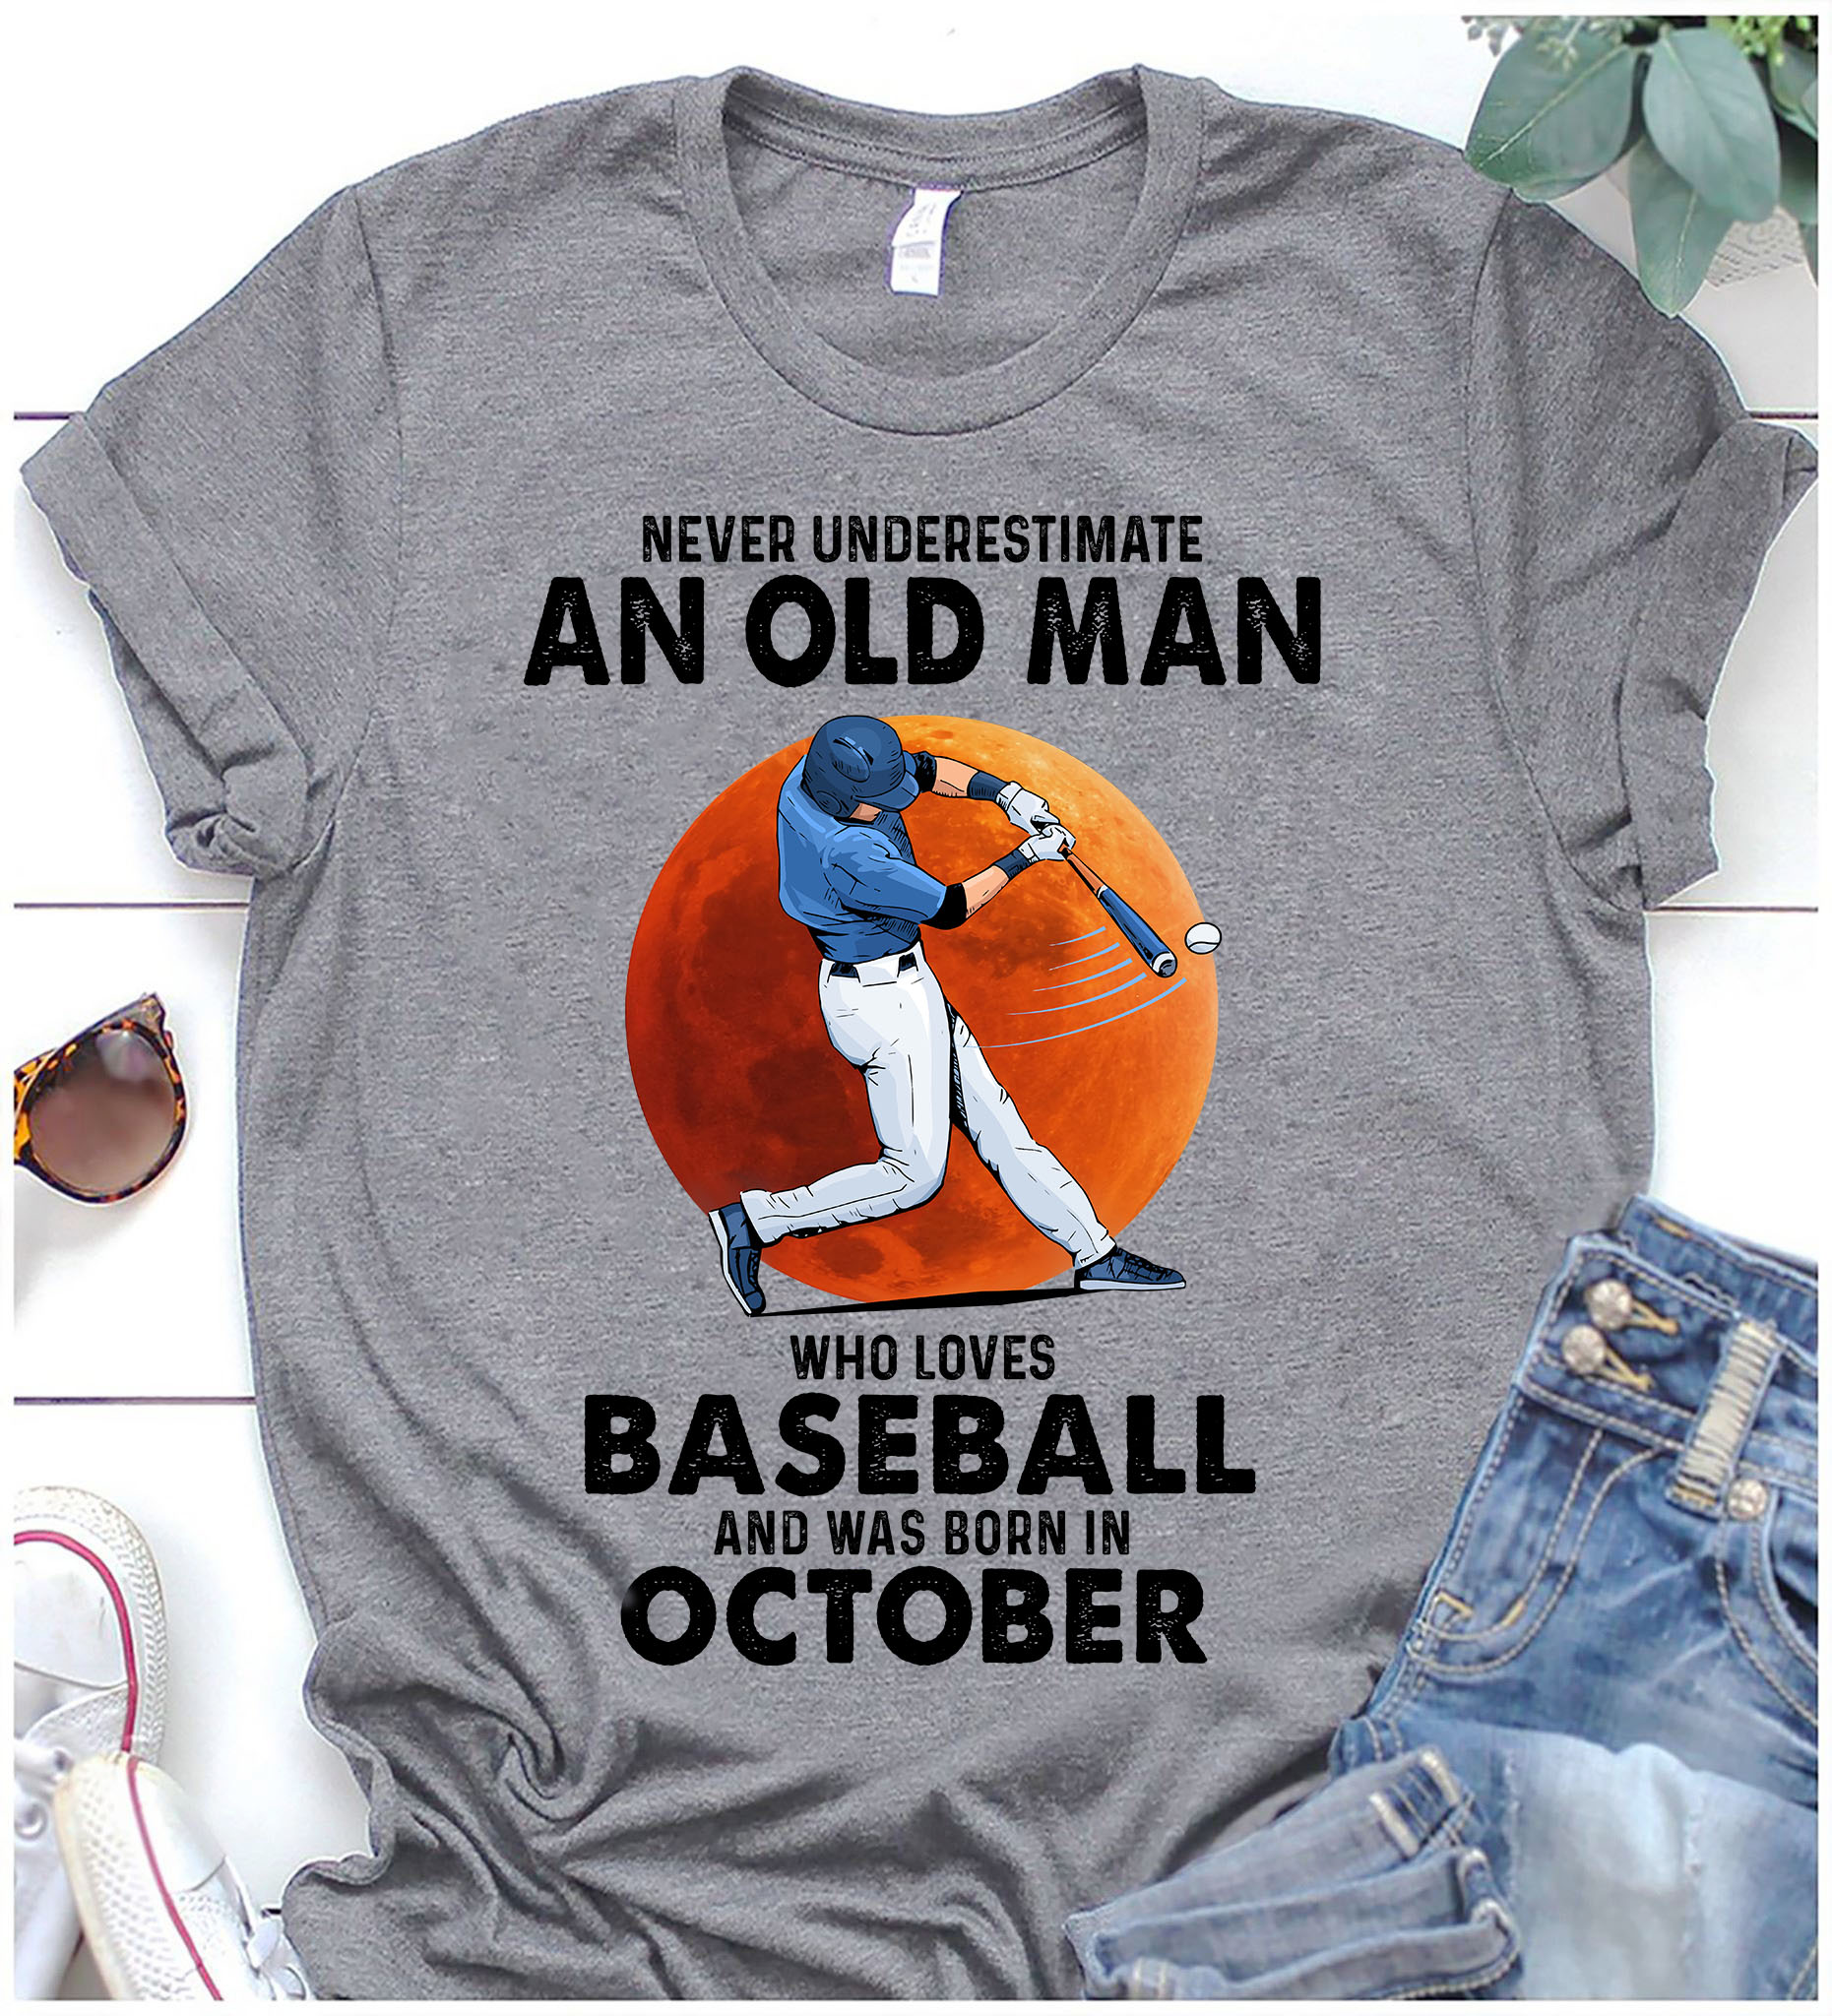 Never underestimate an old man who loves baseball and was born in October